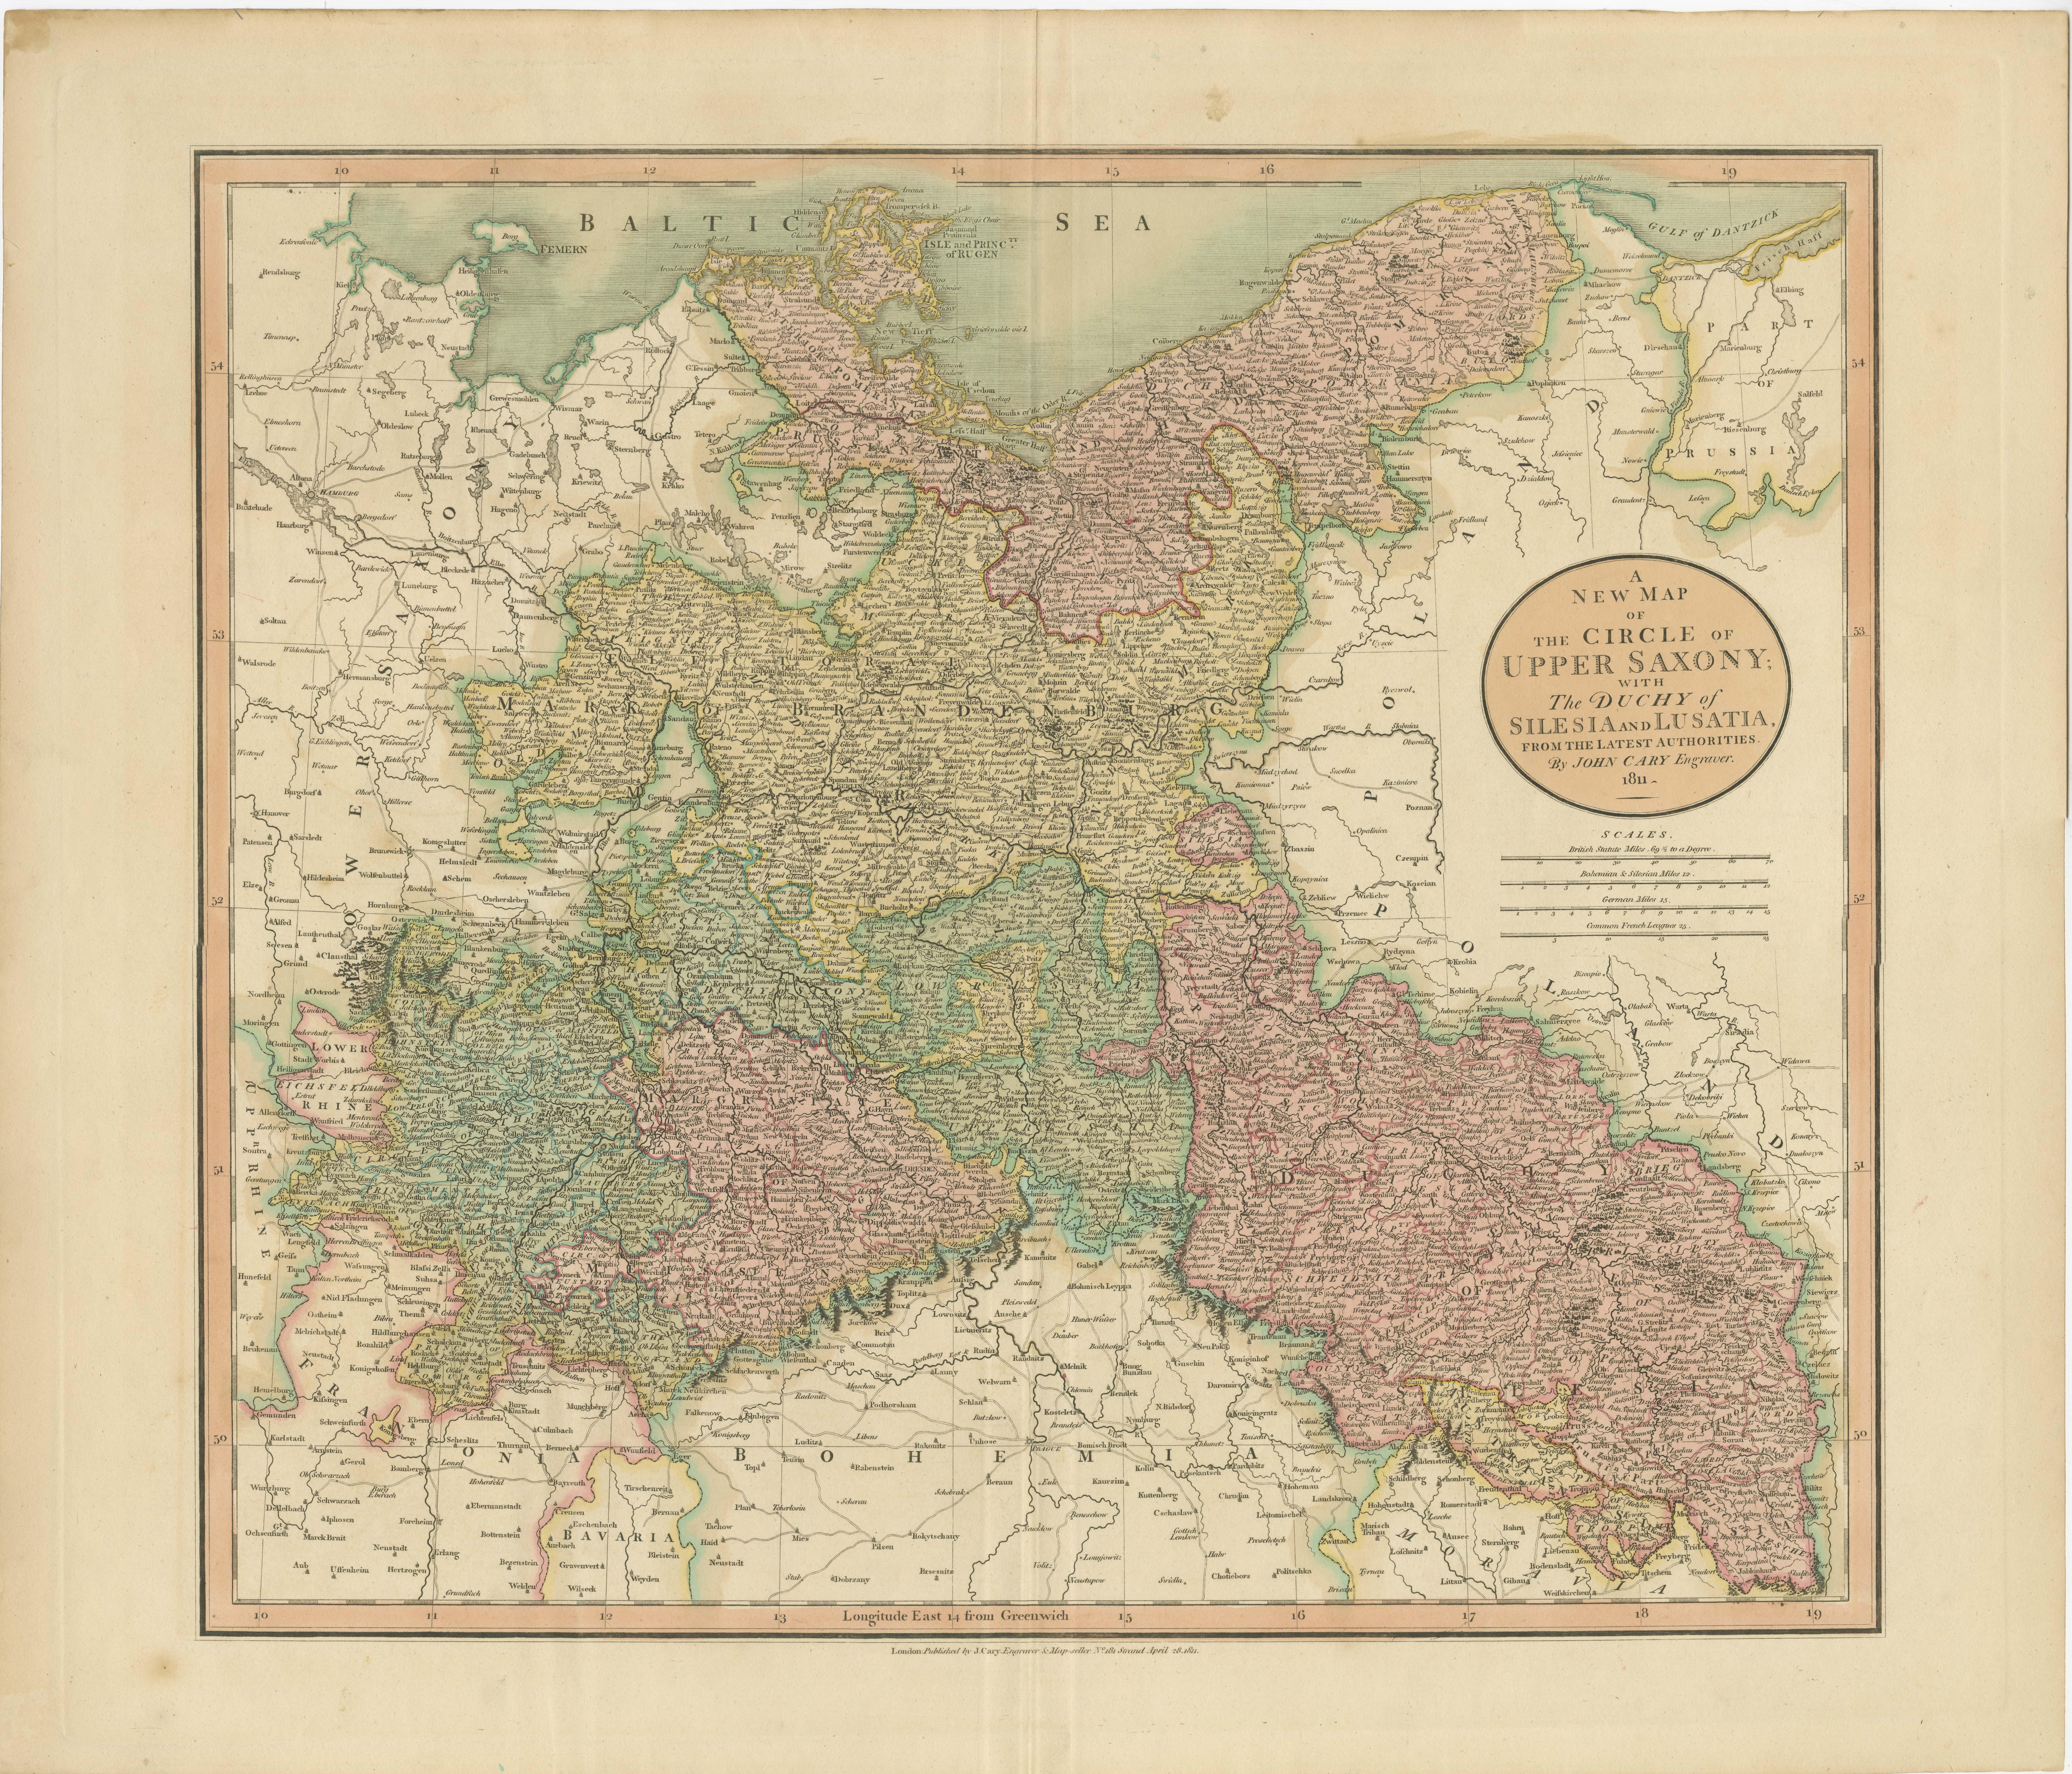 Antique map titled 'A New Map of the Circle of Upper Saxony: with the Duchy of Silesi and Lusatia, from the latest authorities'. Clear and accurate map of what is now the eastern part of Germany, with parts of Poland and Slovakia. This map